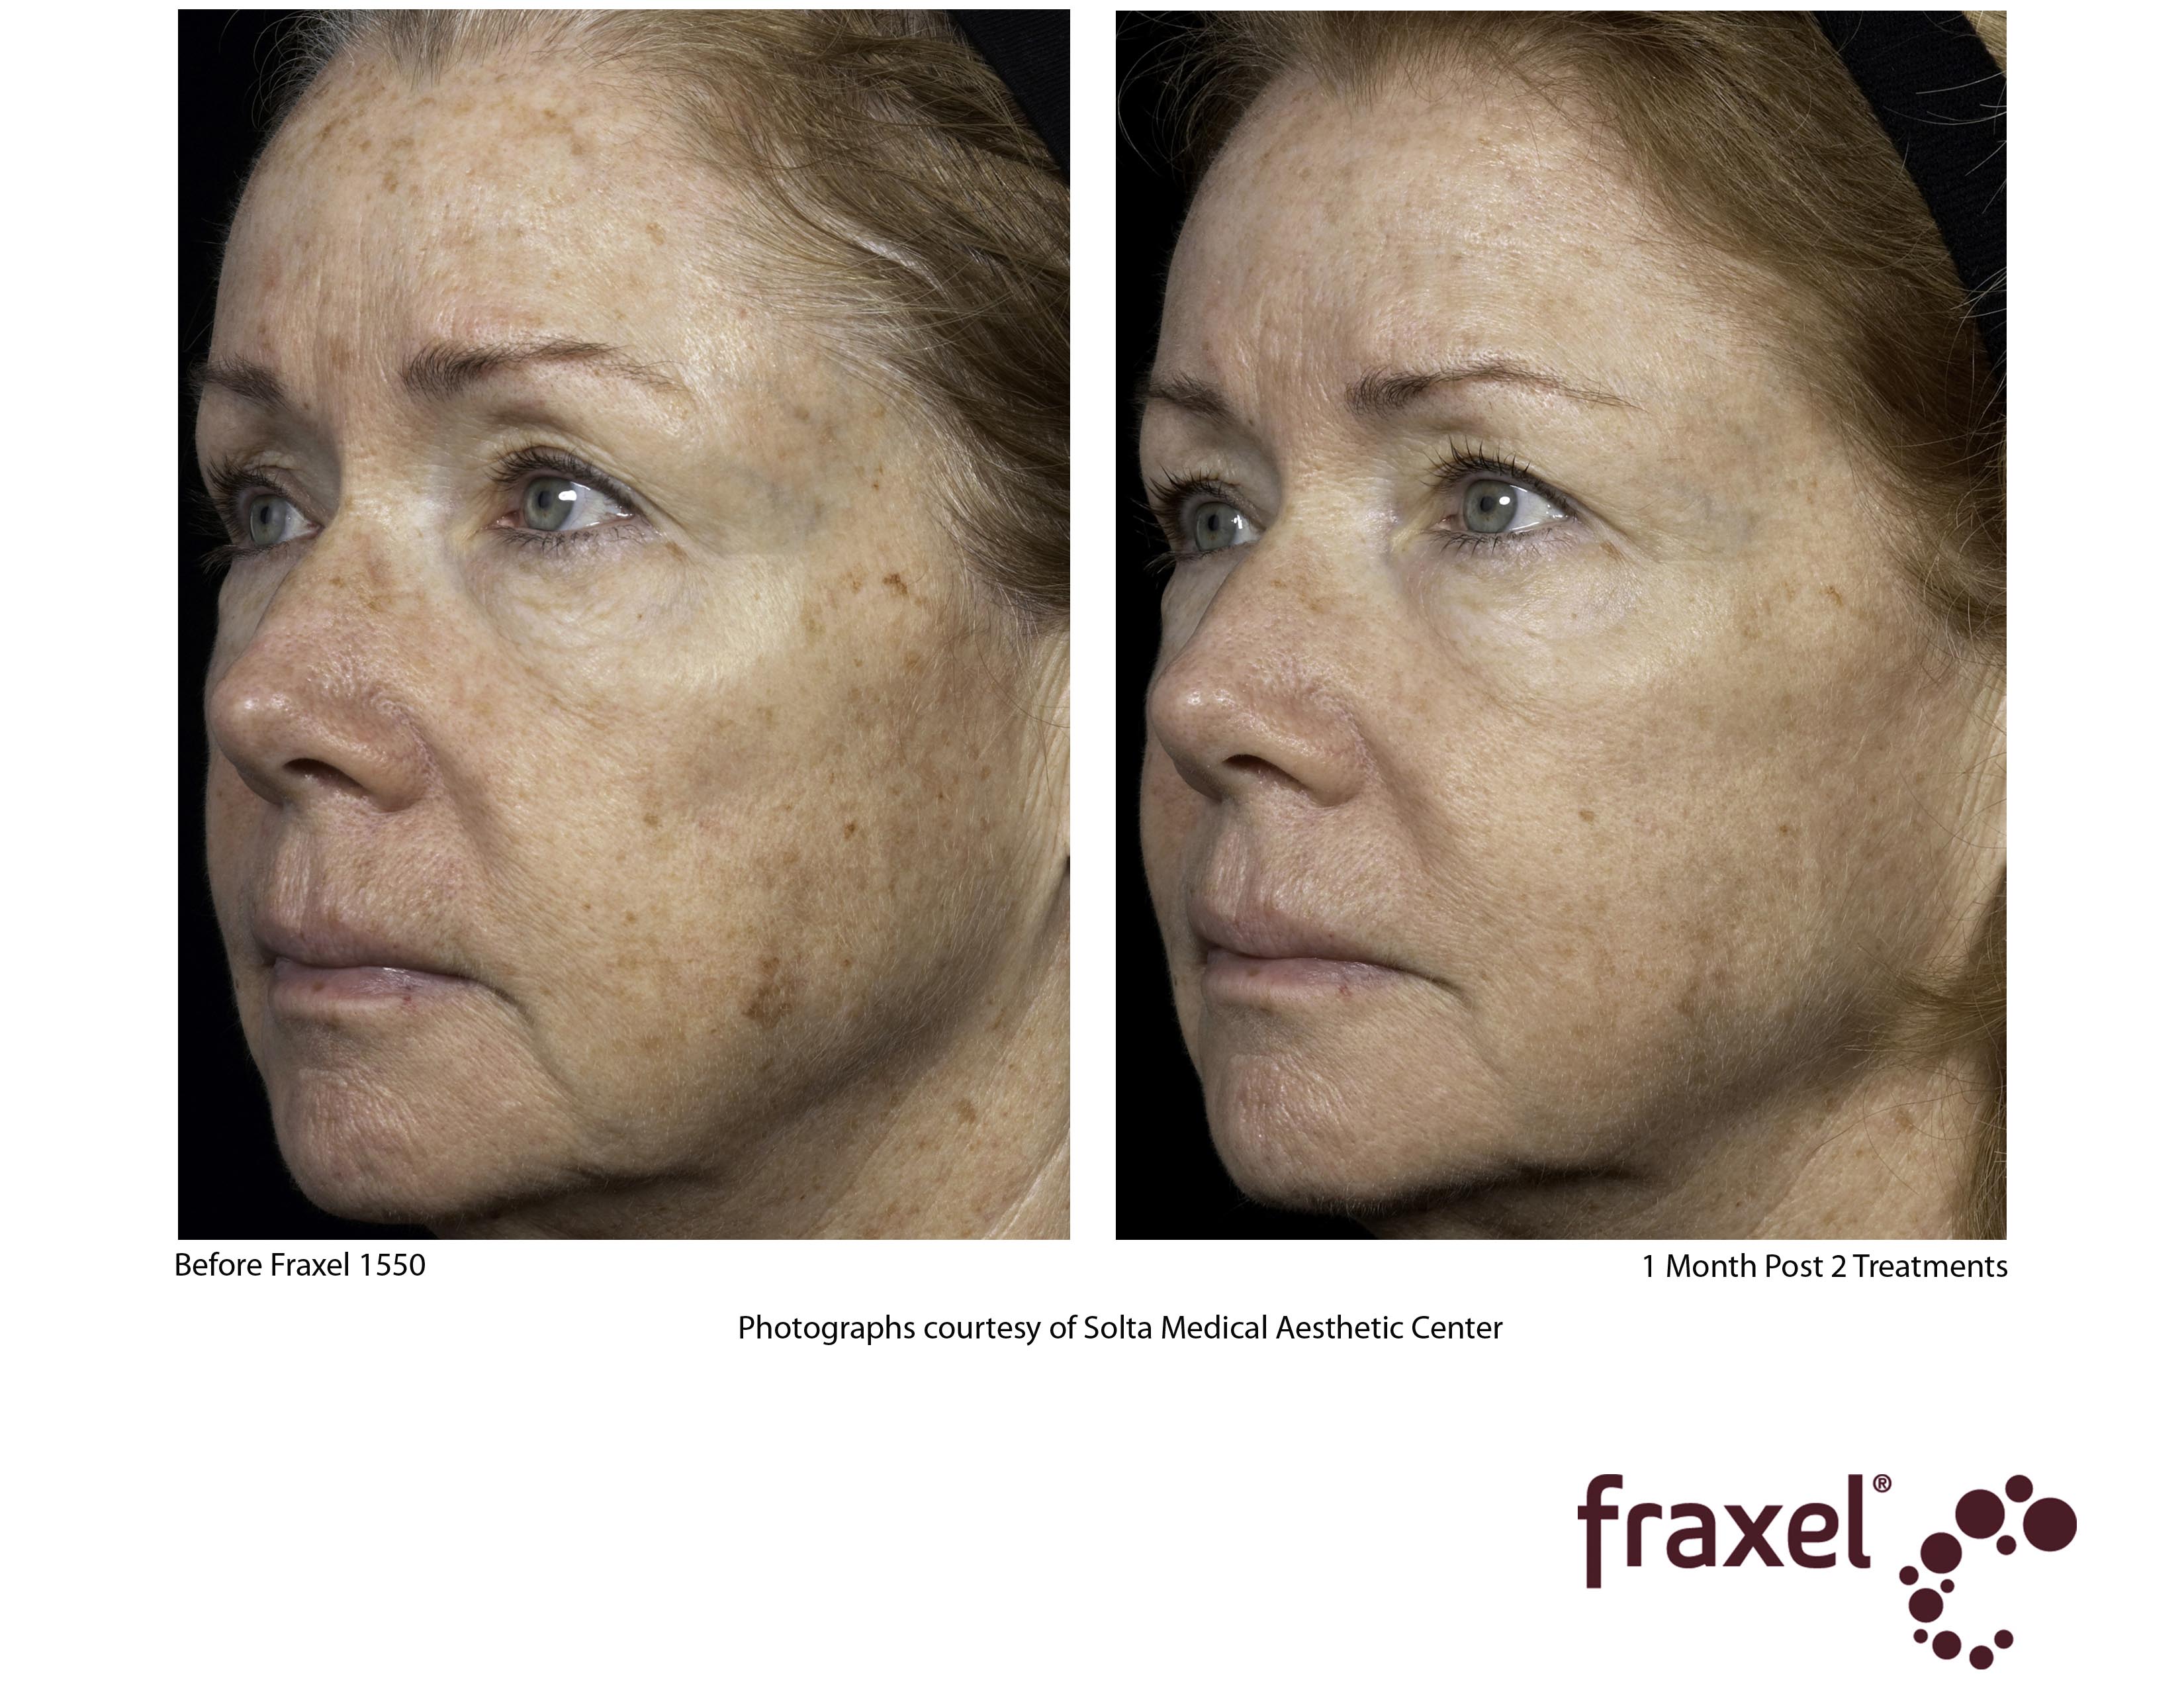 Fraxel Laser Treatment, Cost & Results